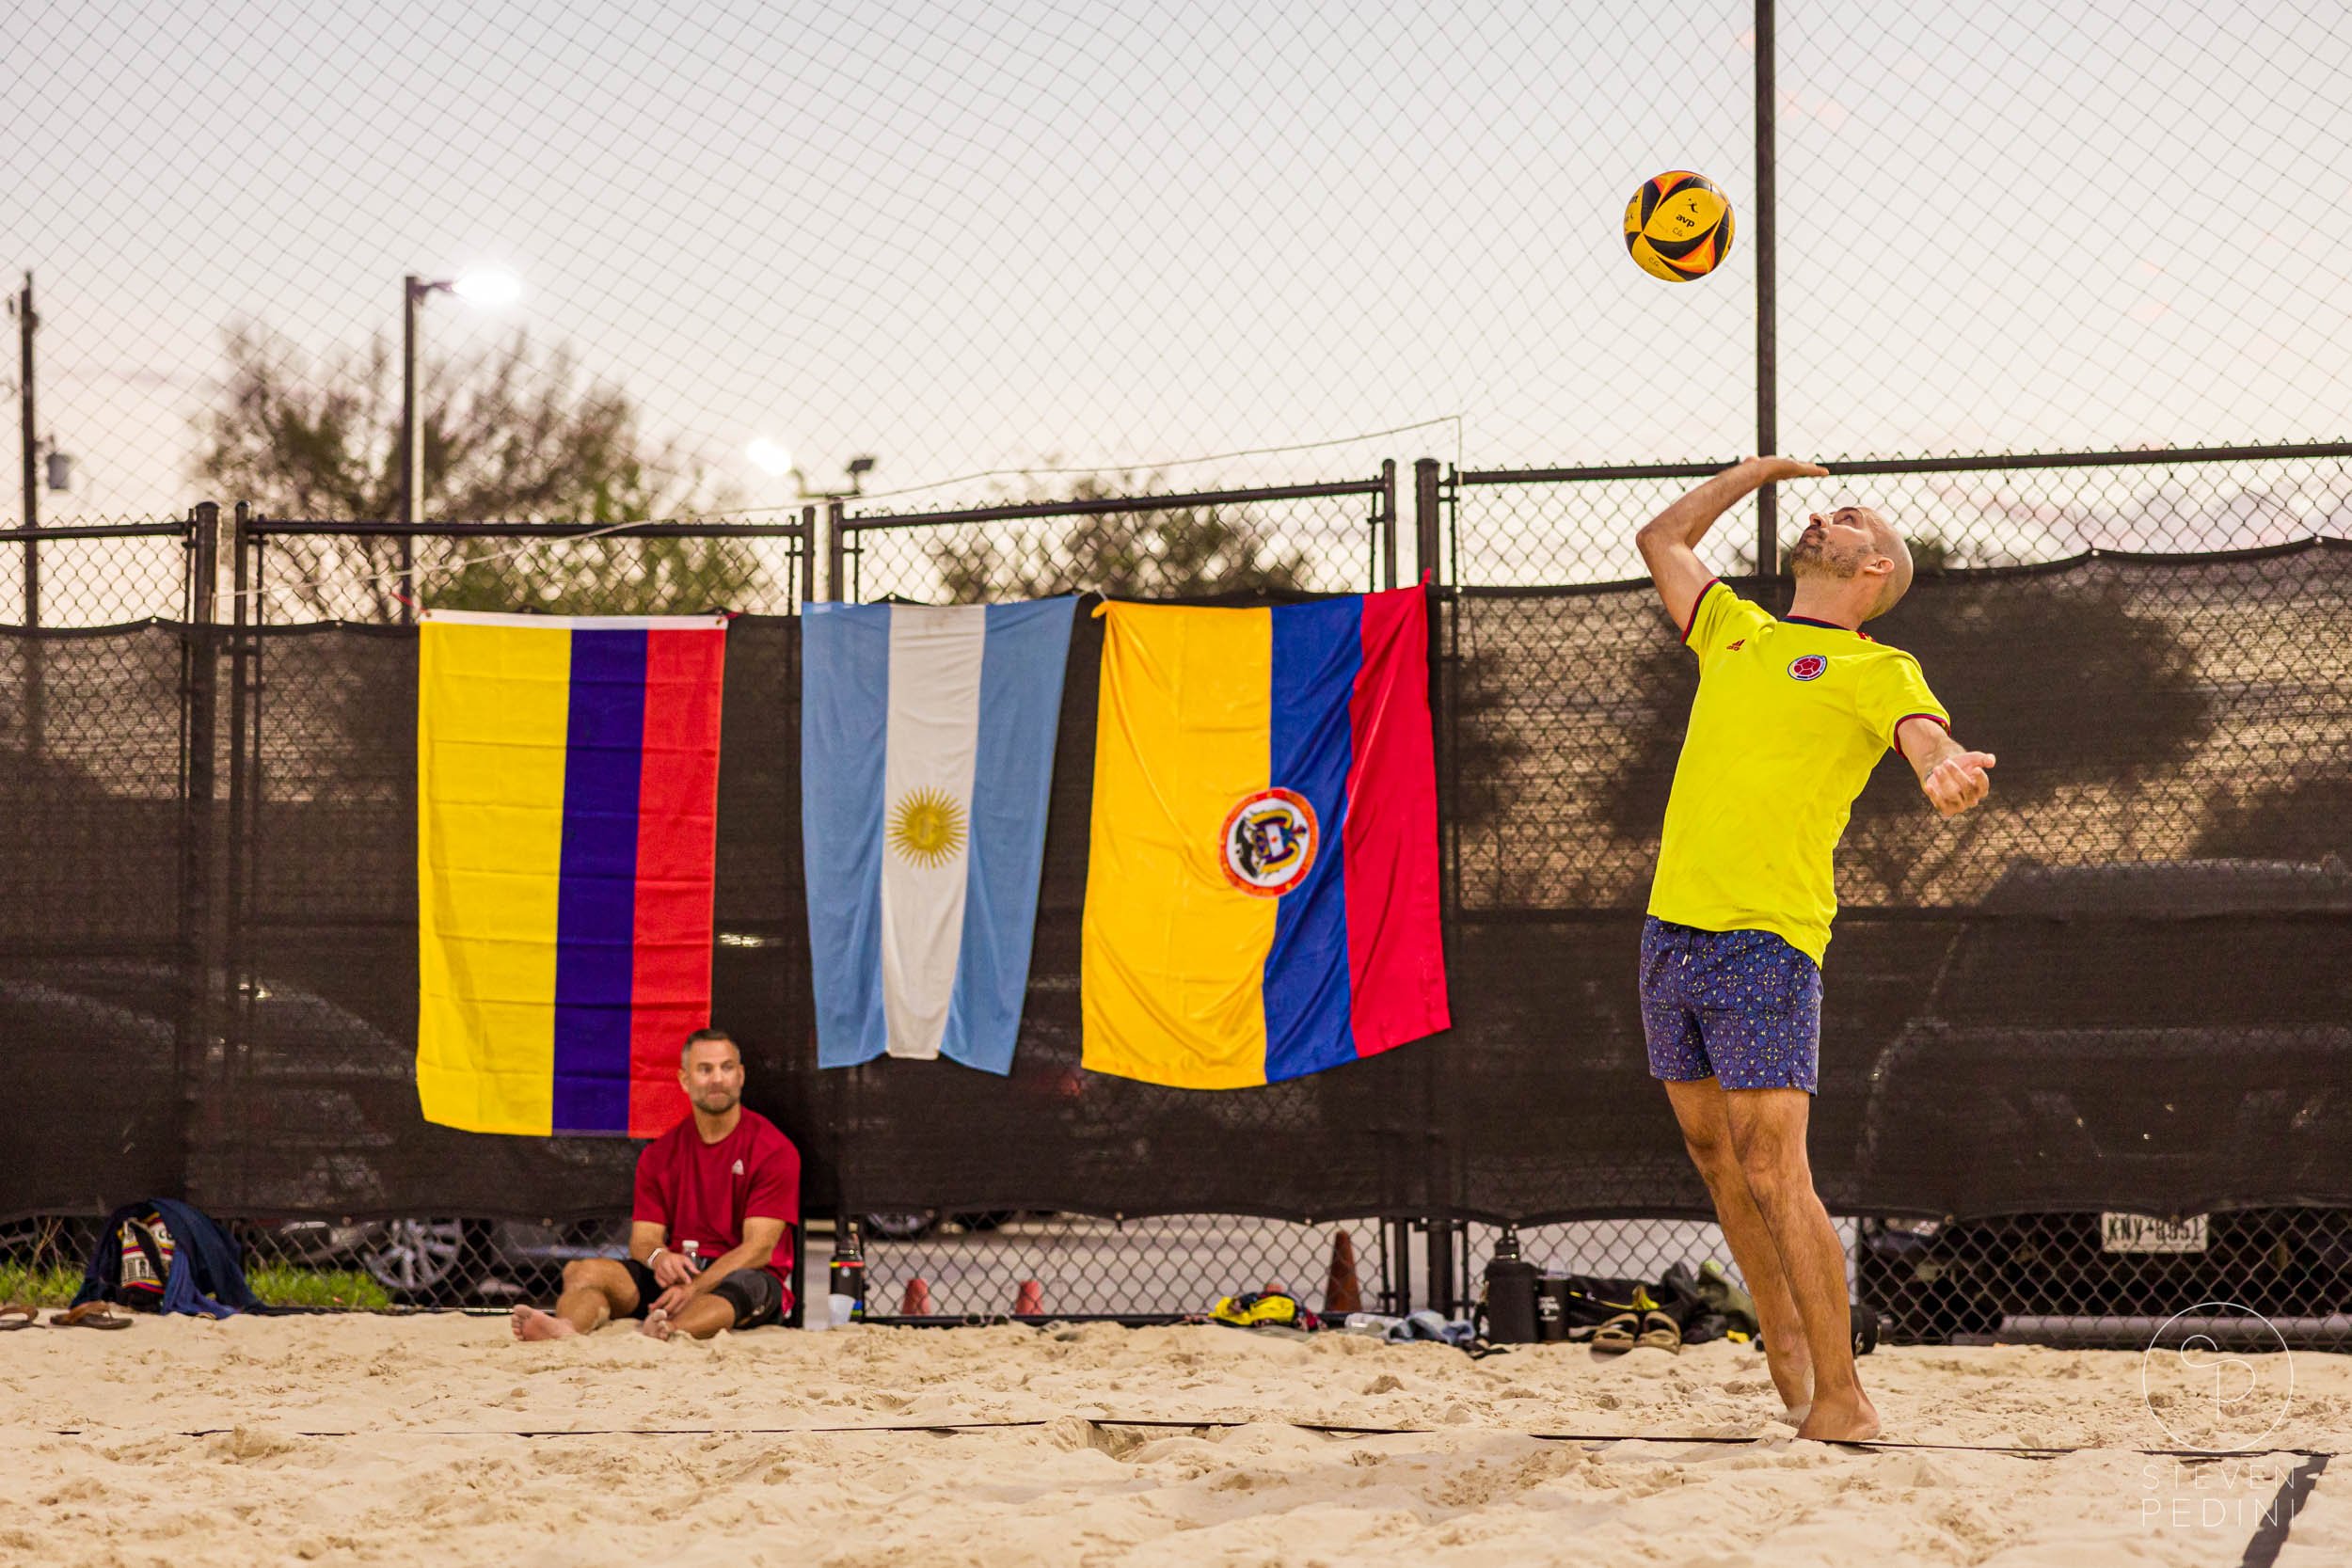 Steven Pedini Photography - Bumpy Pickle - Sand Volleyball - Houston TX - World Cup of Volleyball - 00264.jpg